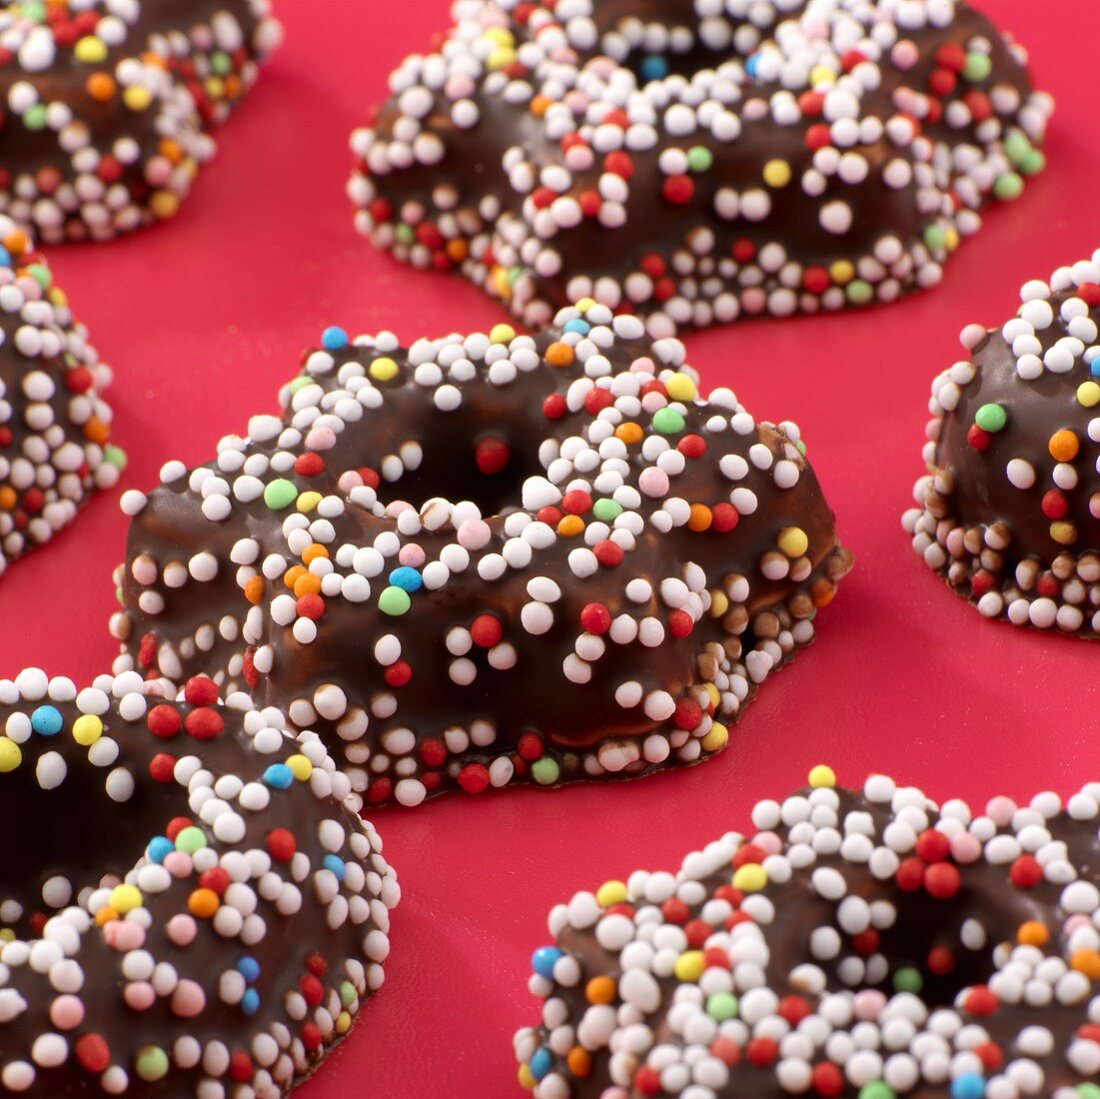 Chocolate stars with coloured sprinkles